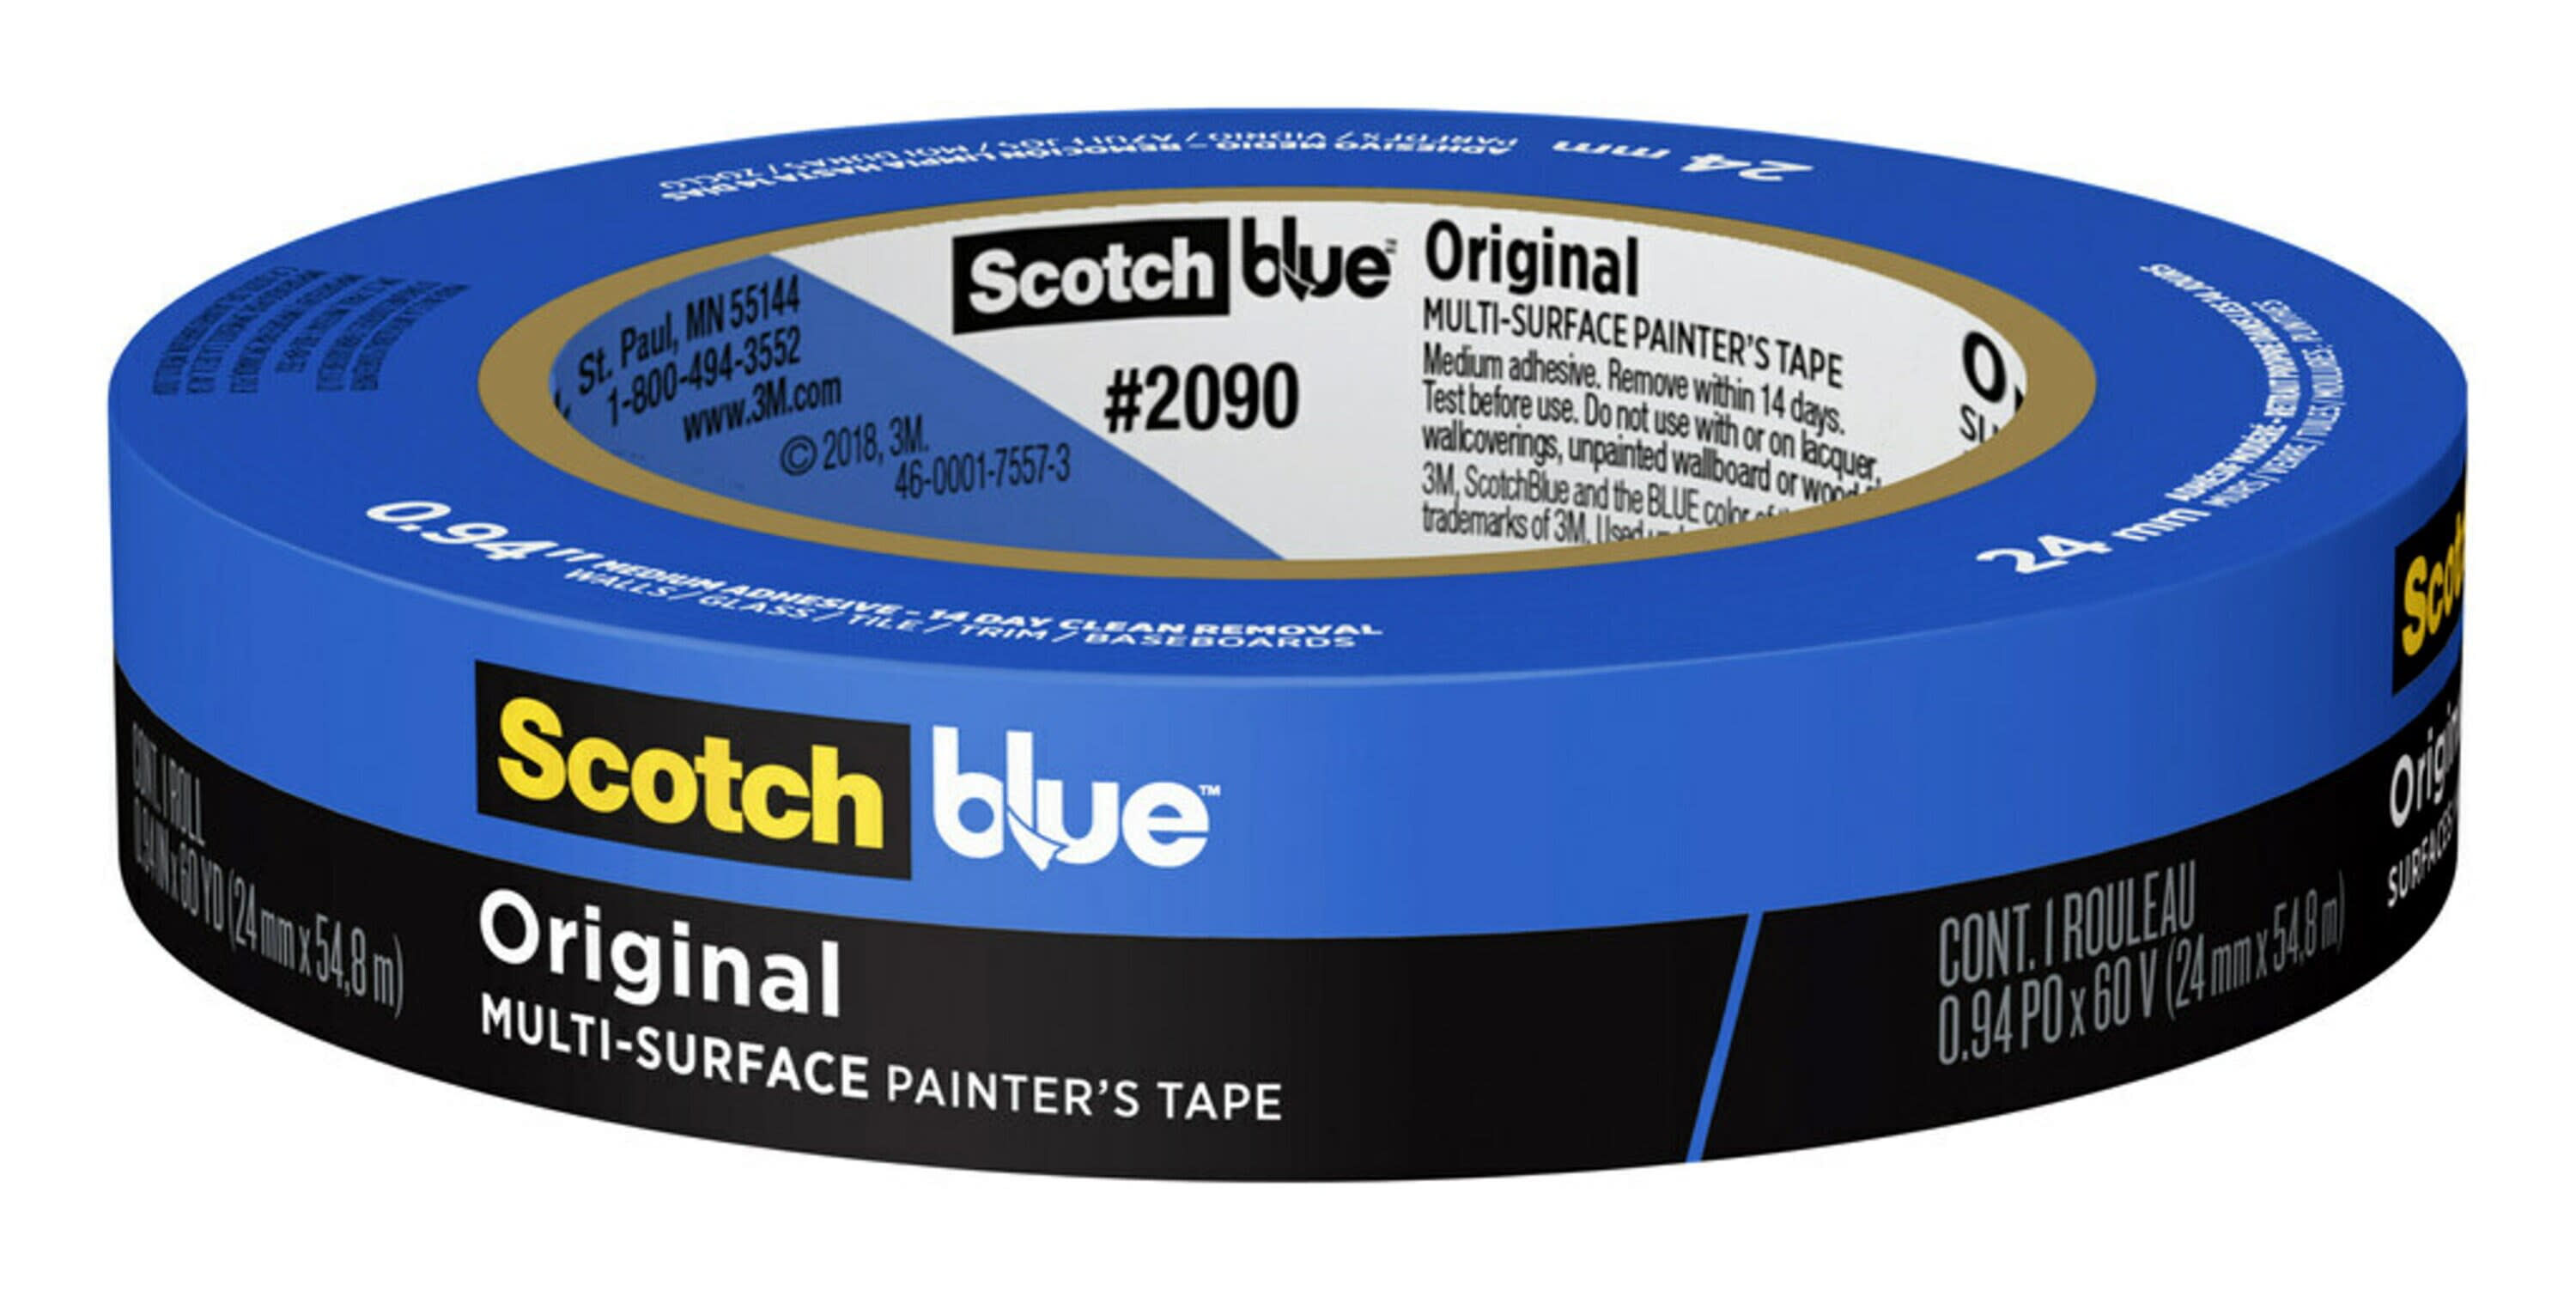 ScotchBlue Original Multi-Surface Painters Tape, Blue, 0.94 inches x 60 yards, 1 Roll